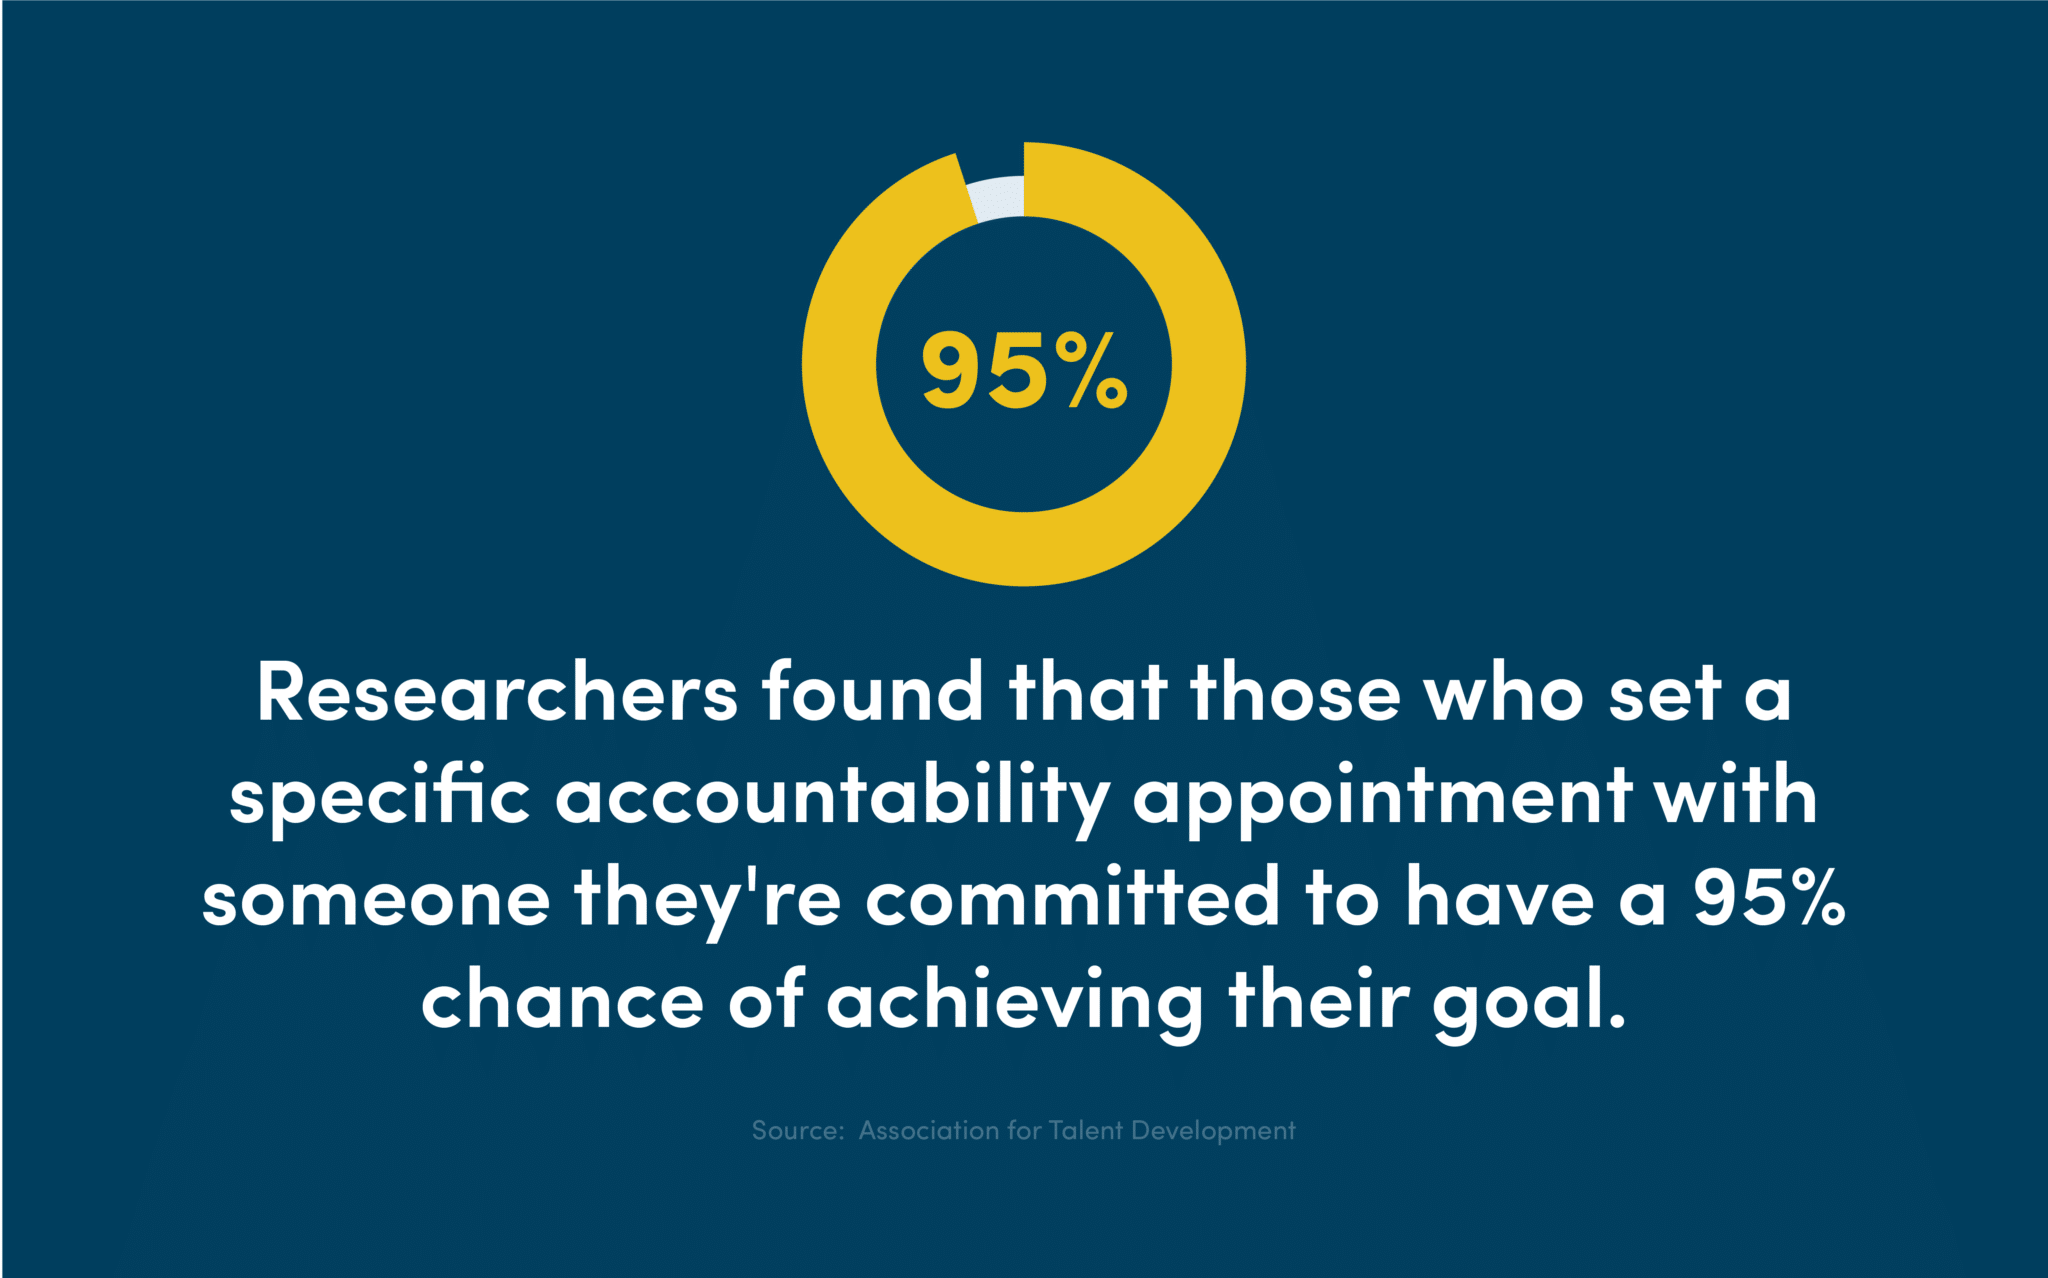 Researchers found that those who set a specific accountability appointment with someone they're committed to have a 95% chance of achieving their goal.